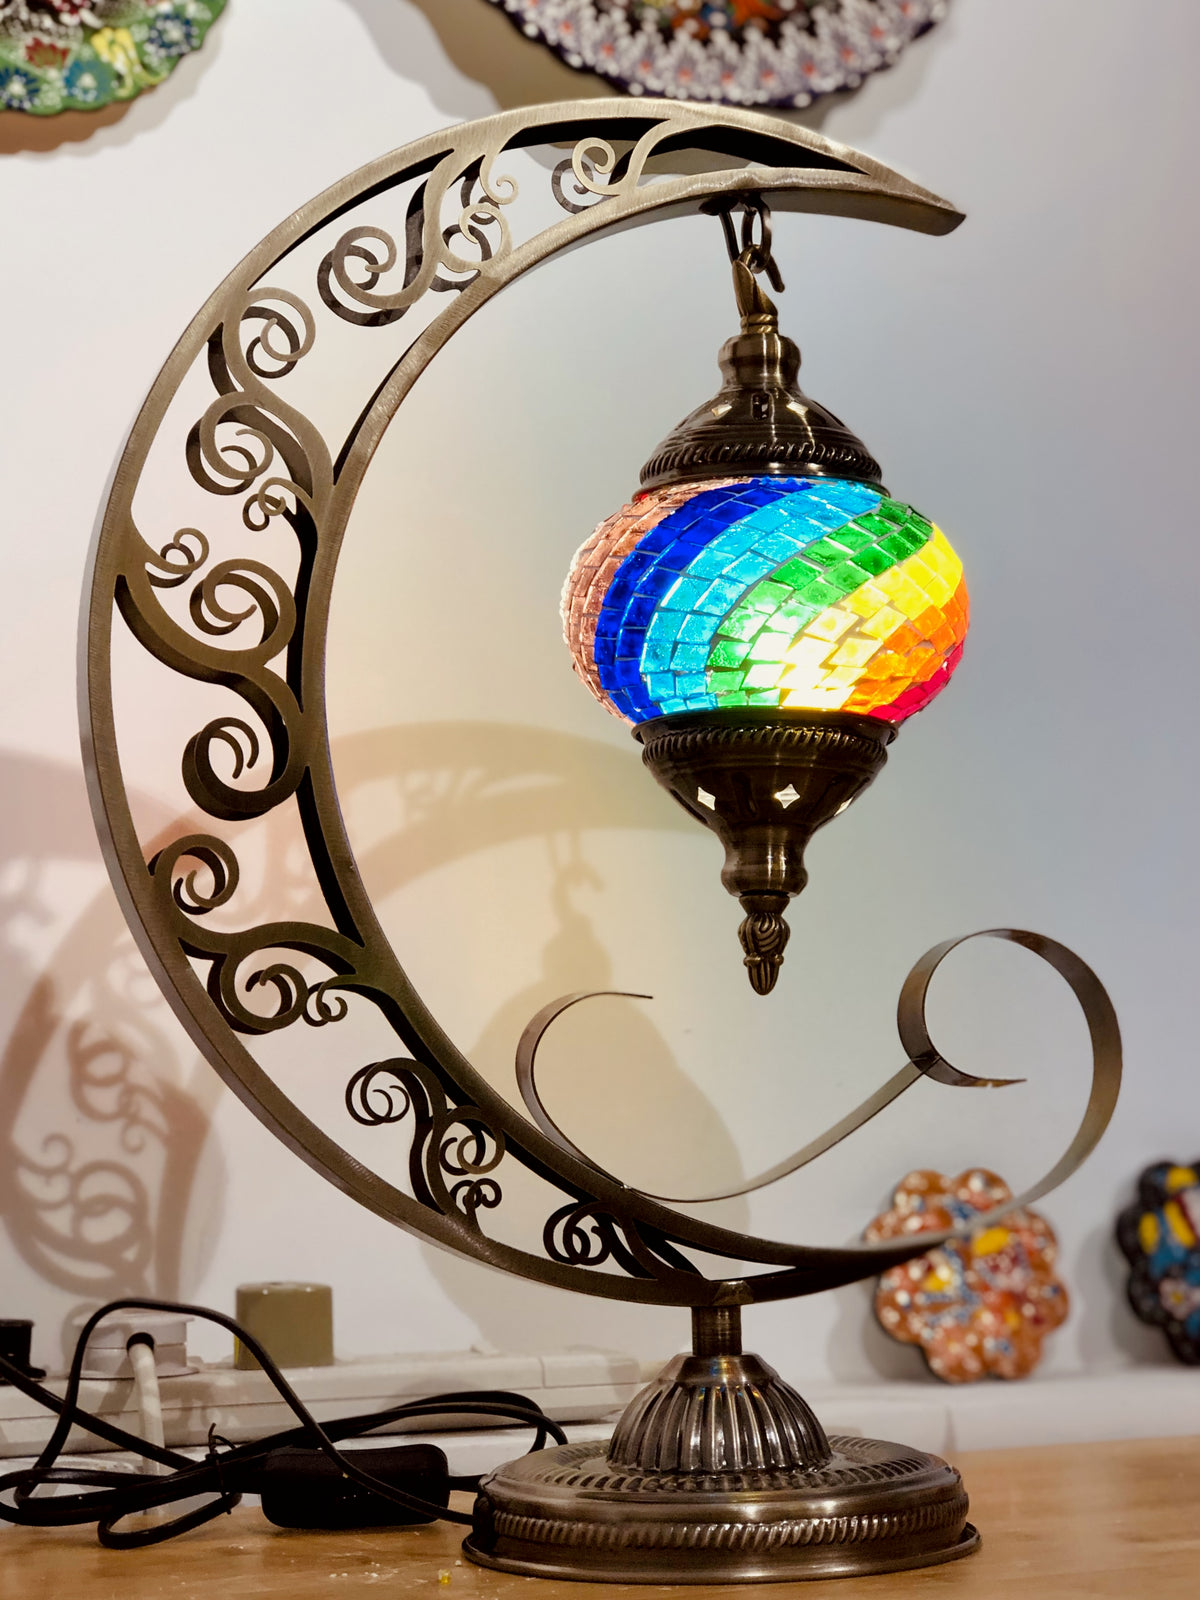 Global DIY: How to Make Your Own Moroccan Glass Lamps